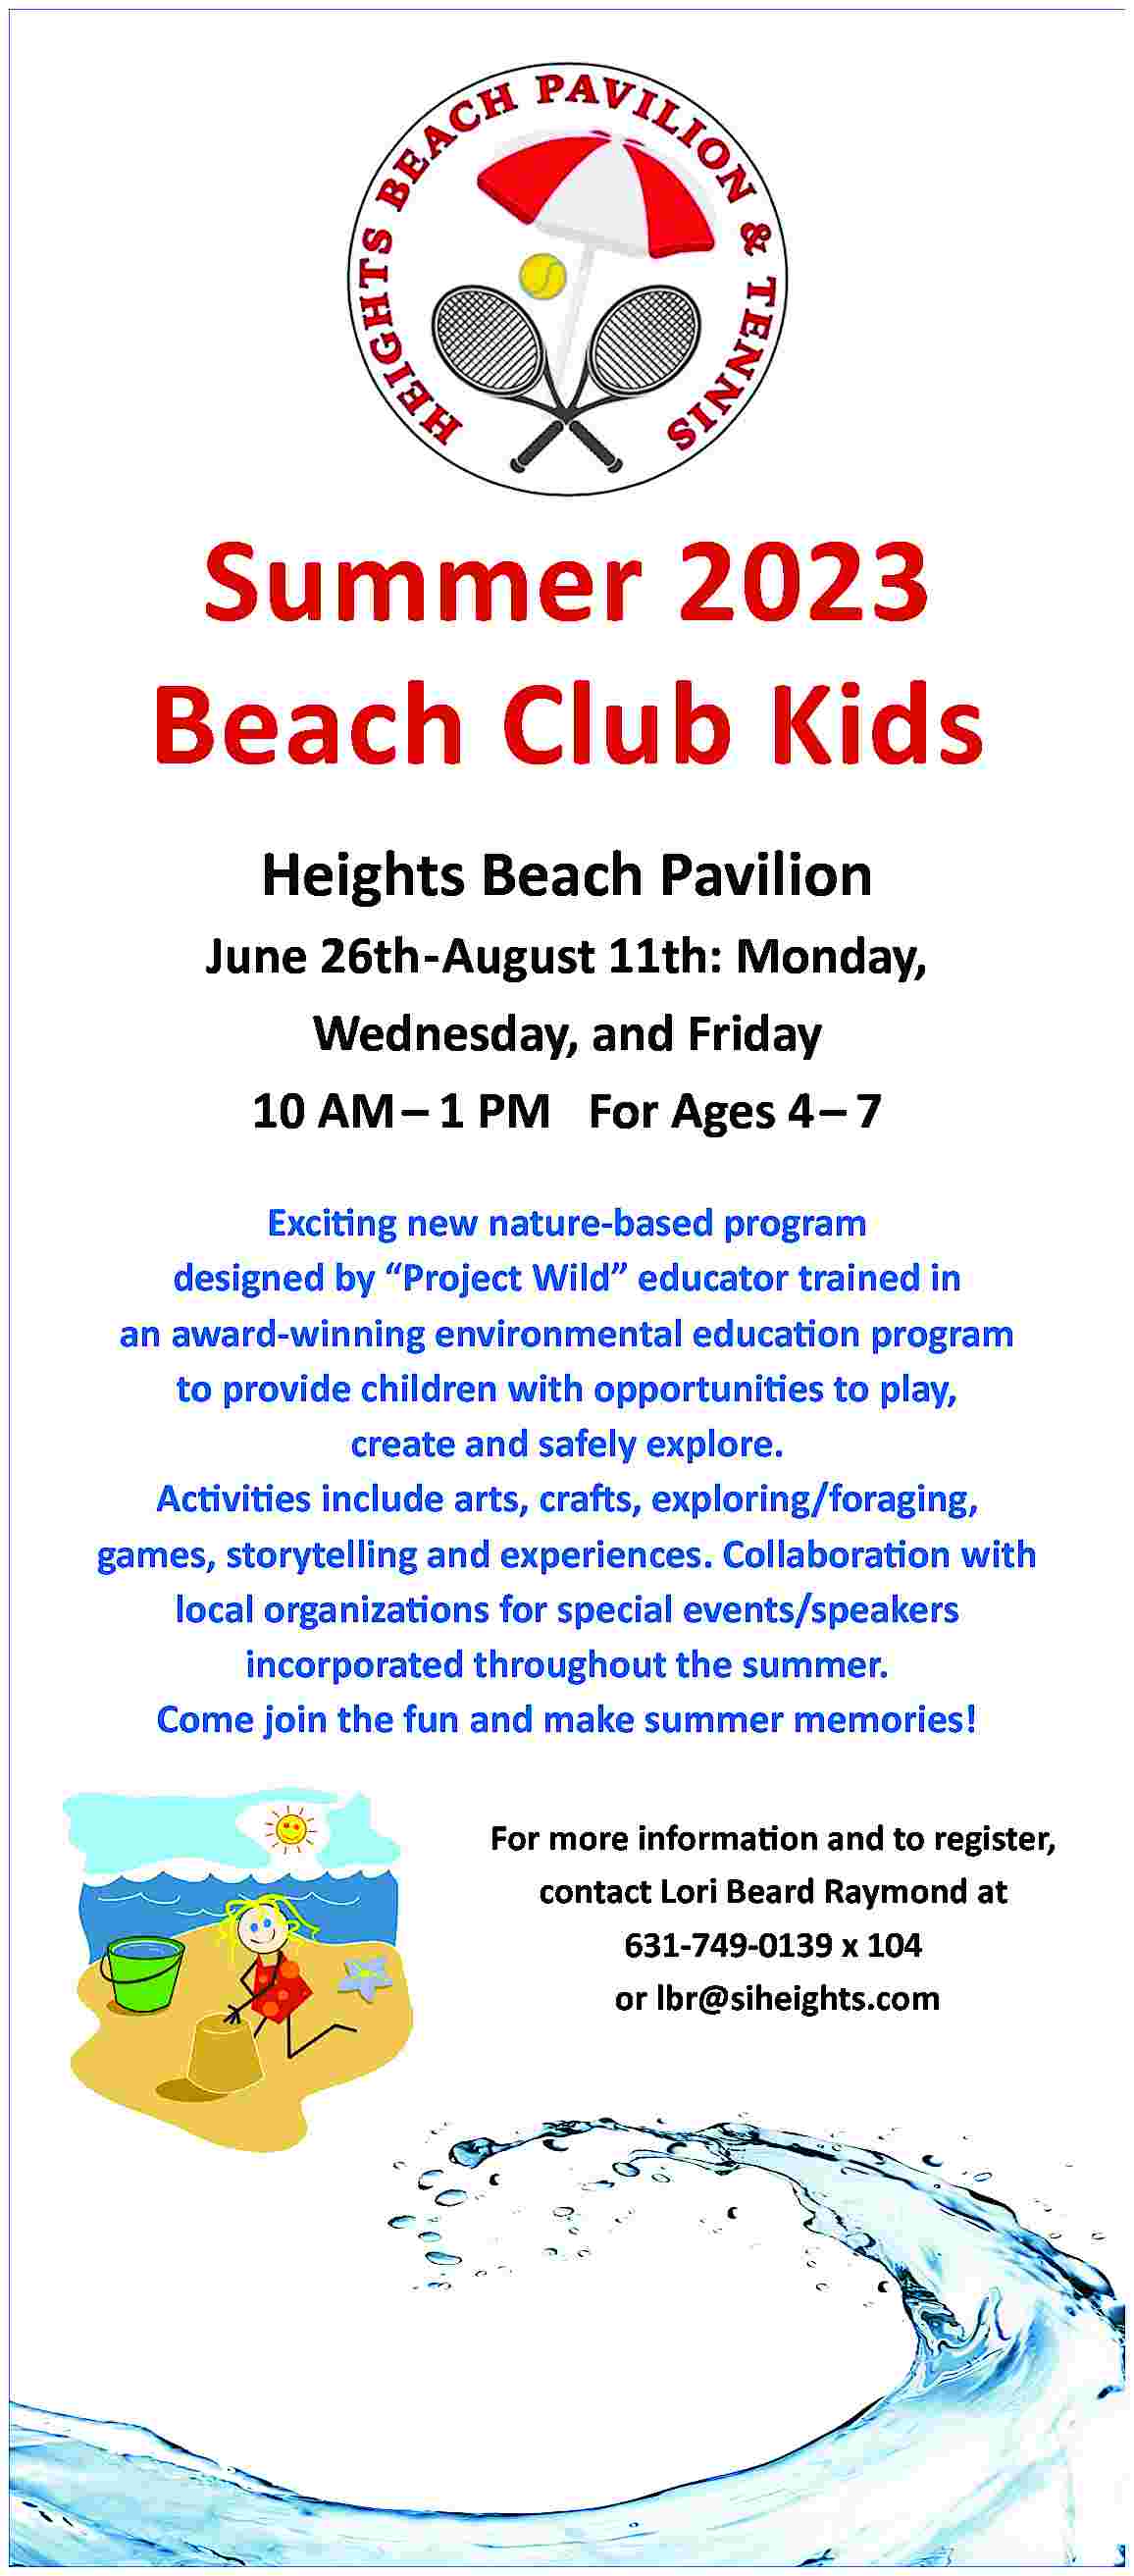 Summer 2023 <br>Beach Club Kids  Summer 2023  Beach Club Kids  Heights Beach Pavilion  June 26th-August 11th: Monday,  Wednesday, and Friday  10 AM     1 PM For Ages 4     7  Exciting new nature-based program  designed by    Project Wild    educator trained in  an award-winning environmental education program  to provide children with opportunities to play,  create and safely explore.  Activities include arts, crafts, exploring/foraging,  games, storytelling and experiences. Collaboration with  local organizations for special events/speakers  incorporated throughout the summer.  Come join the fun and make summer memories!  For more information and to register,  contact Lori Beard Raymond at  631-749-0139 x 104  or lbr@siheights.com     